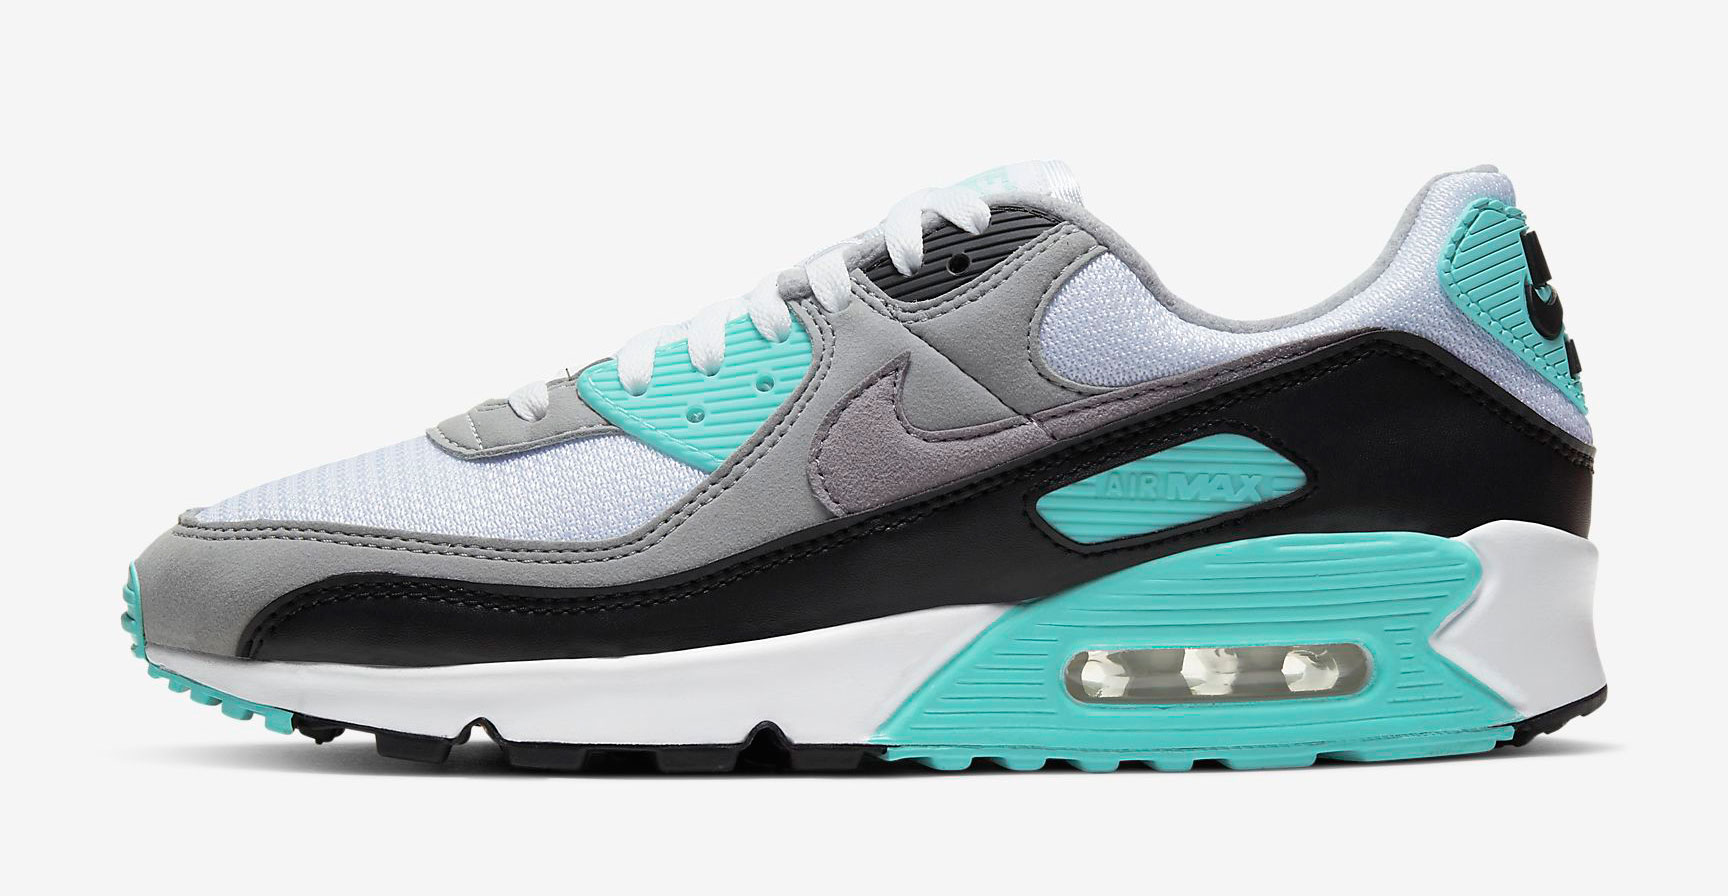 nike-air-max-90-hyper-turquoise-release-date-price-2